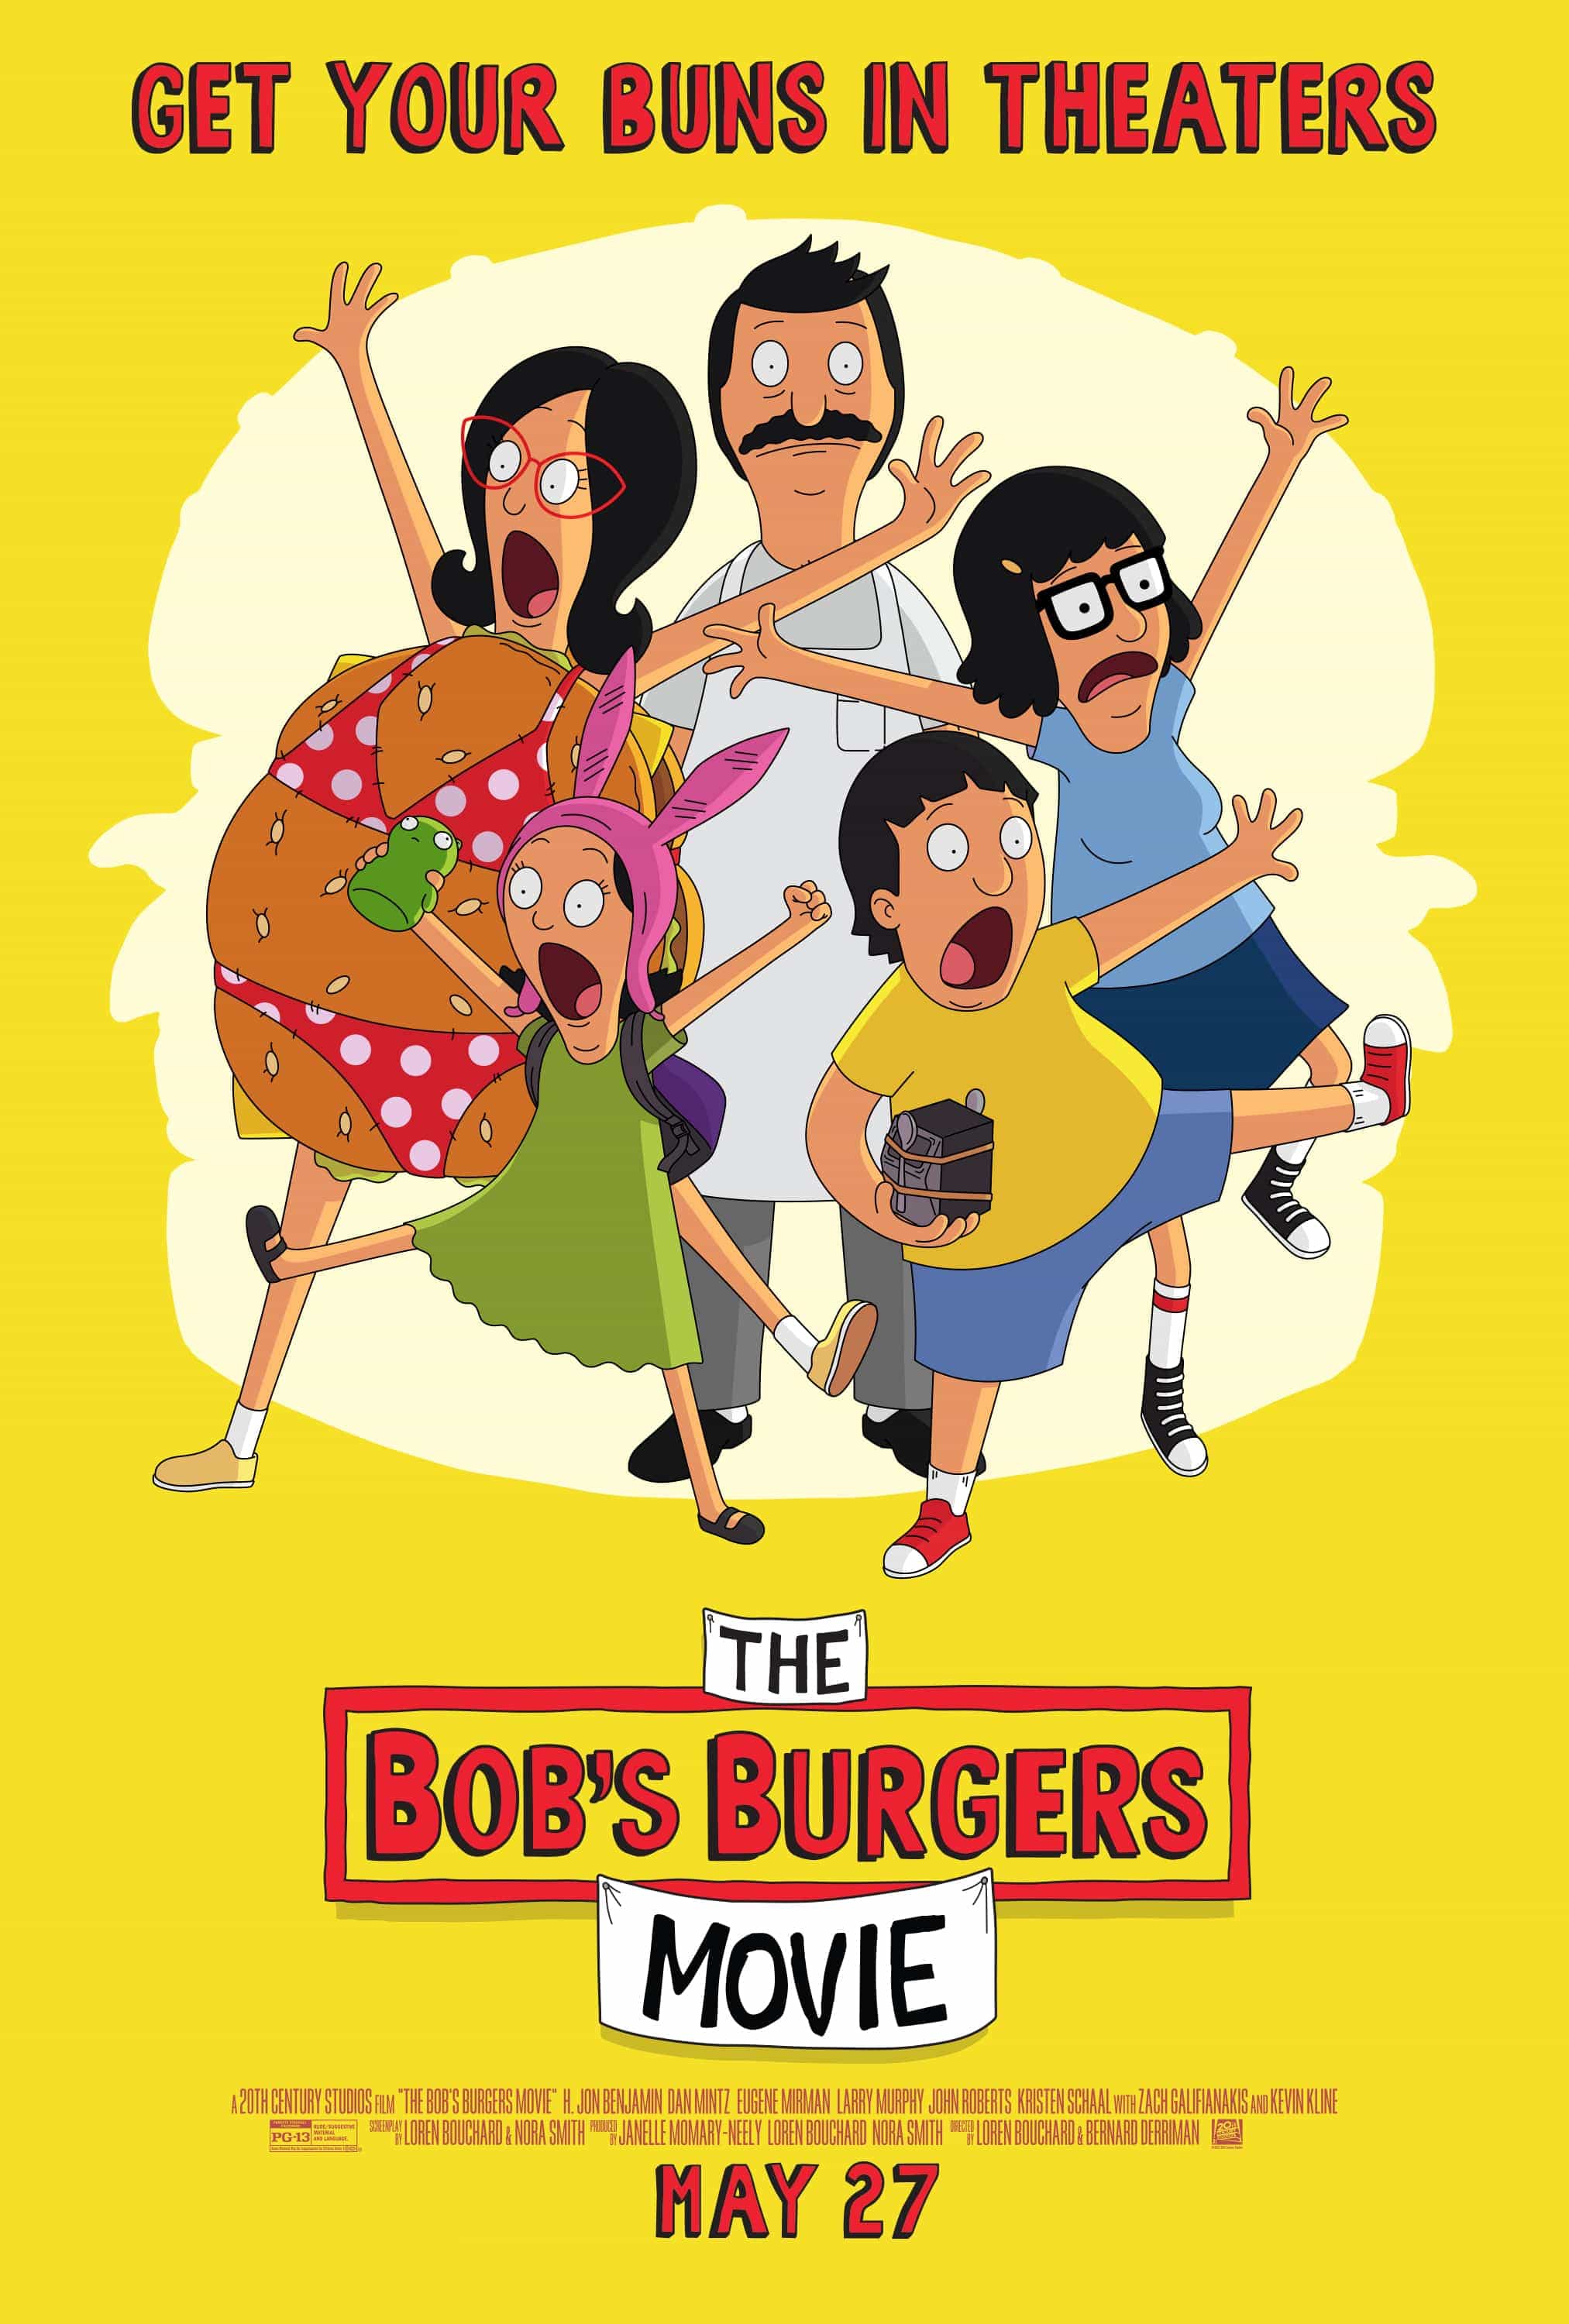 New poster released for The Bob's Burgers Movie starring Kristen Schaal - movie UK release date 27th May 2022 #thebobsburgersmovie